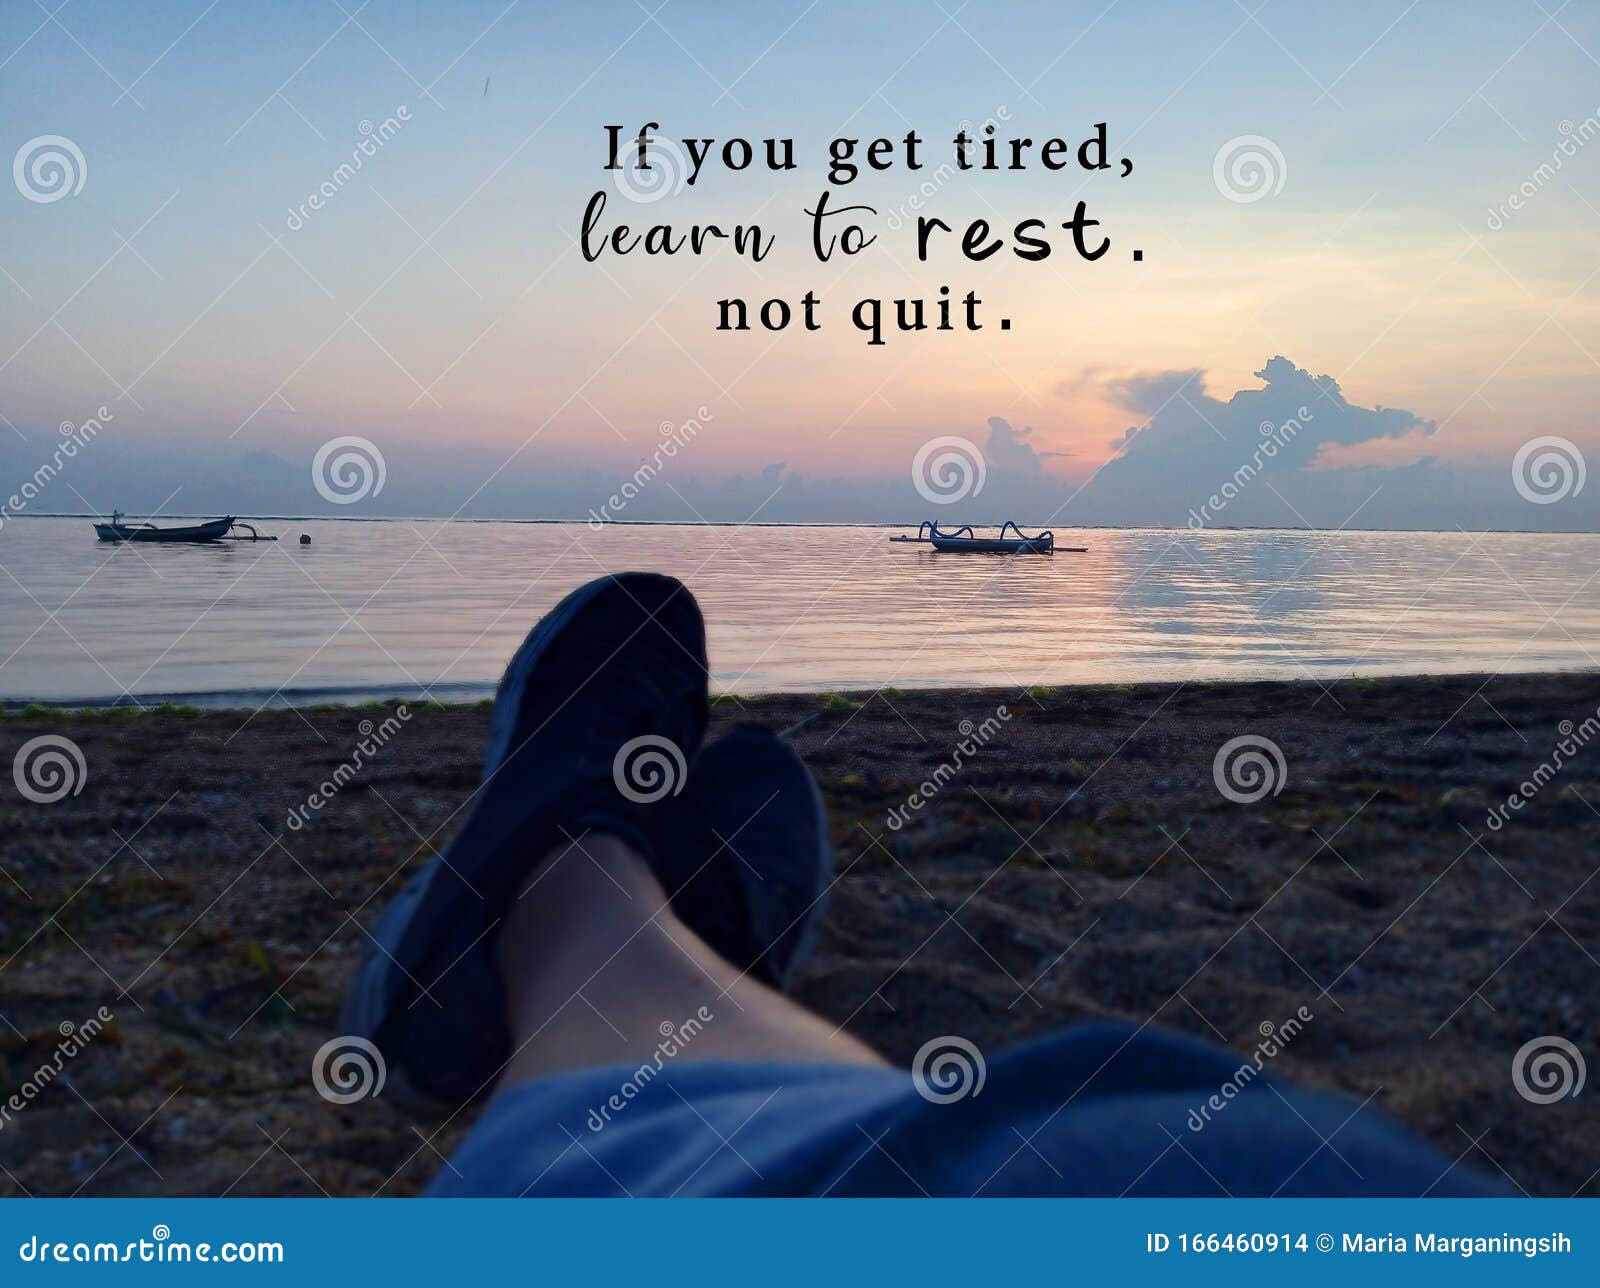 inspirational motivational quote - if you get tired, learn to rest, not quit. with blurry image of young woman legs sitting alone